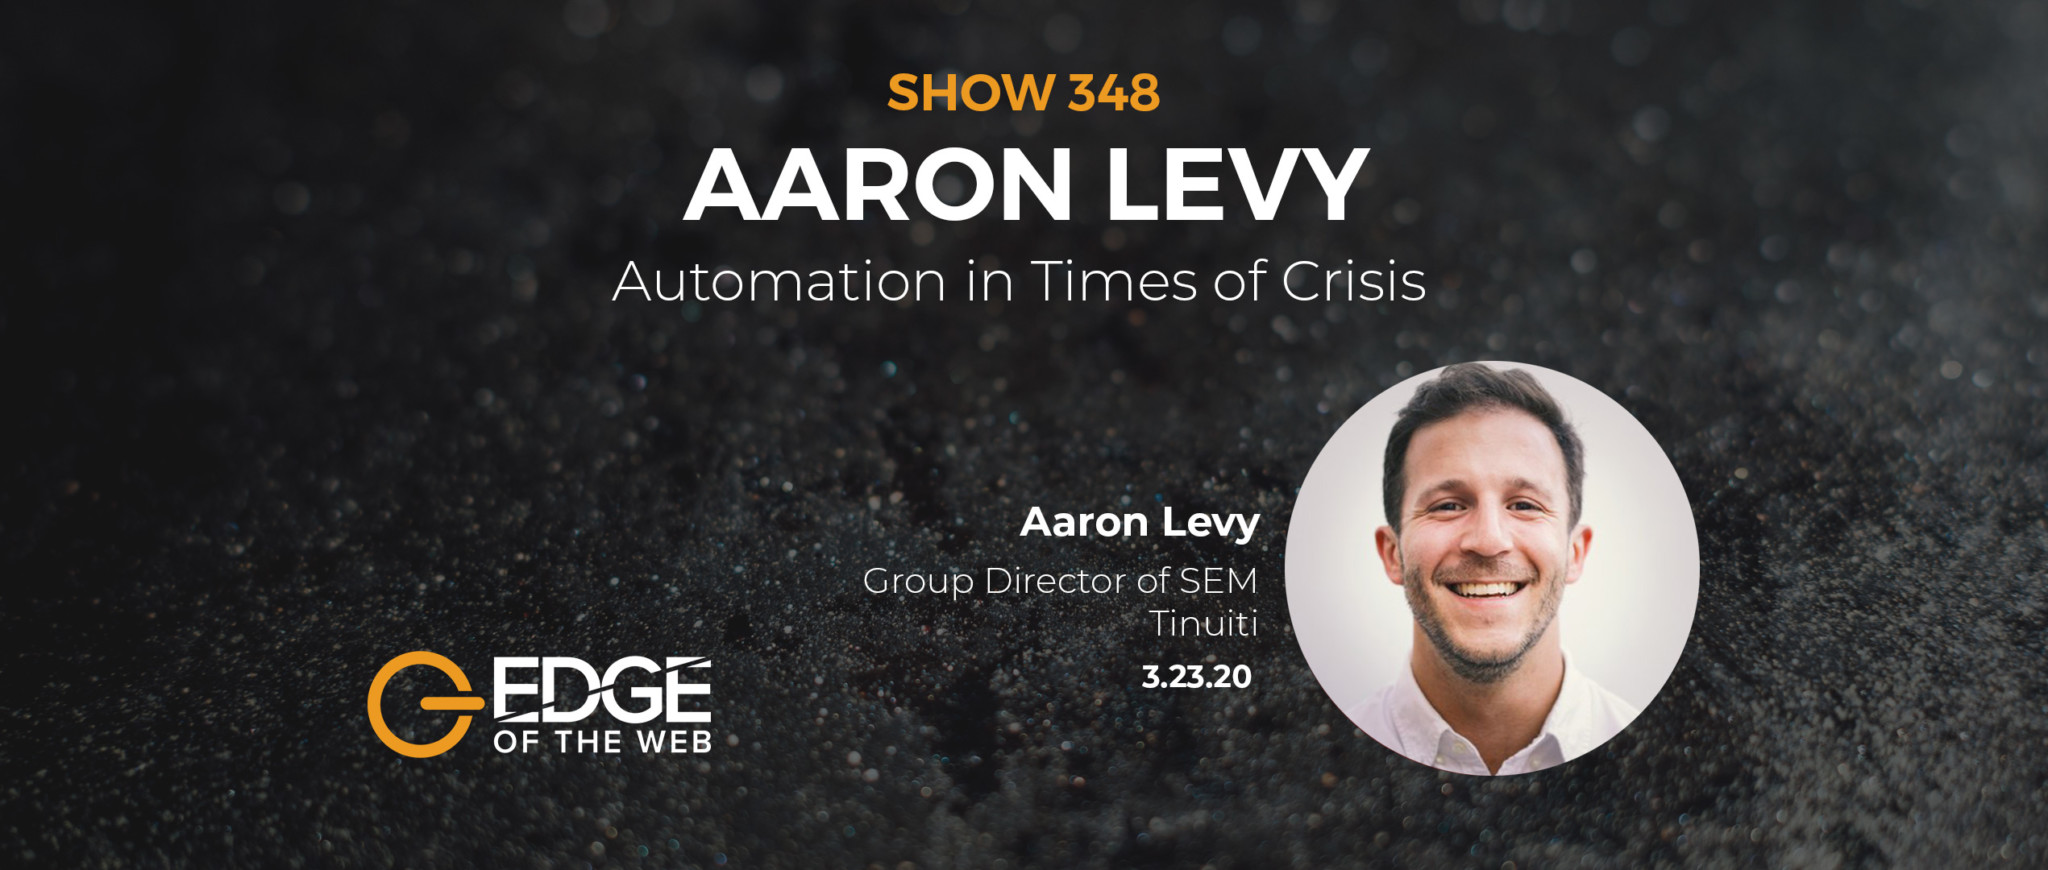 EP 348 Transcript | Automation in Times of Crisis with Aaron Levy